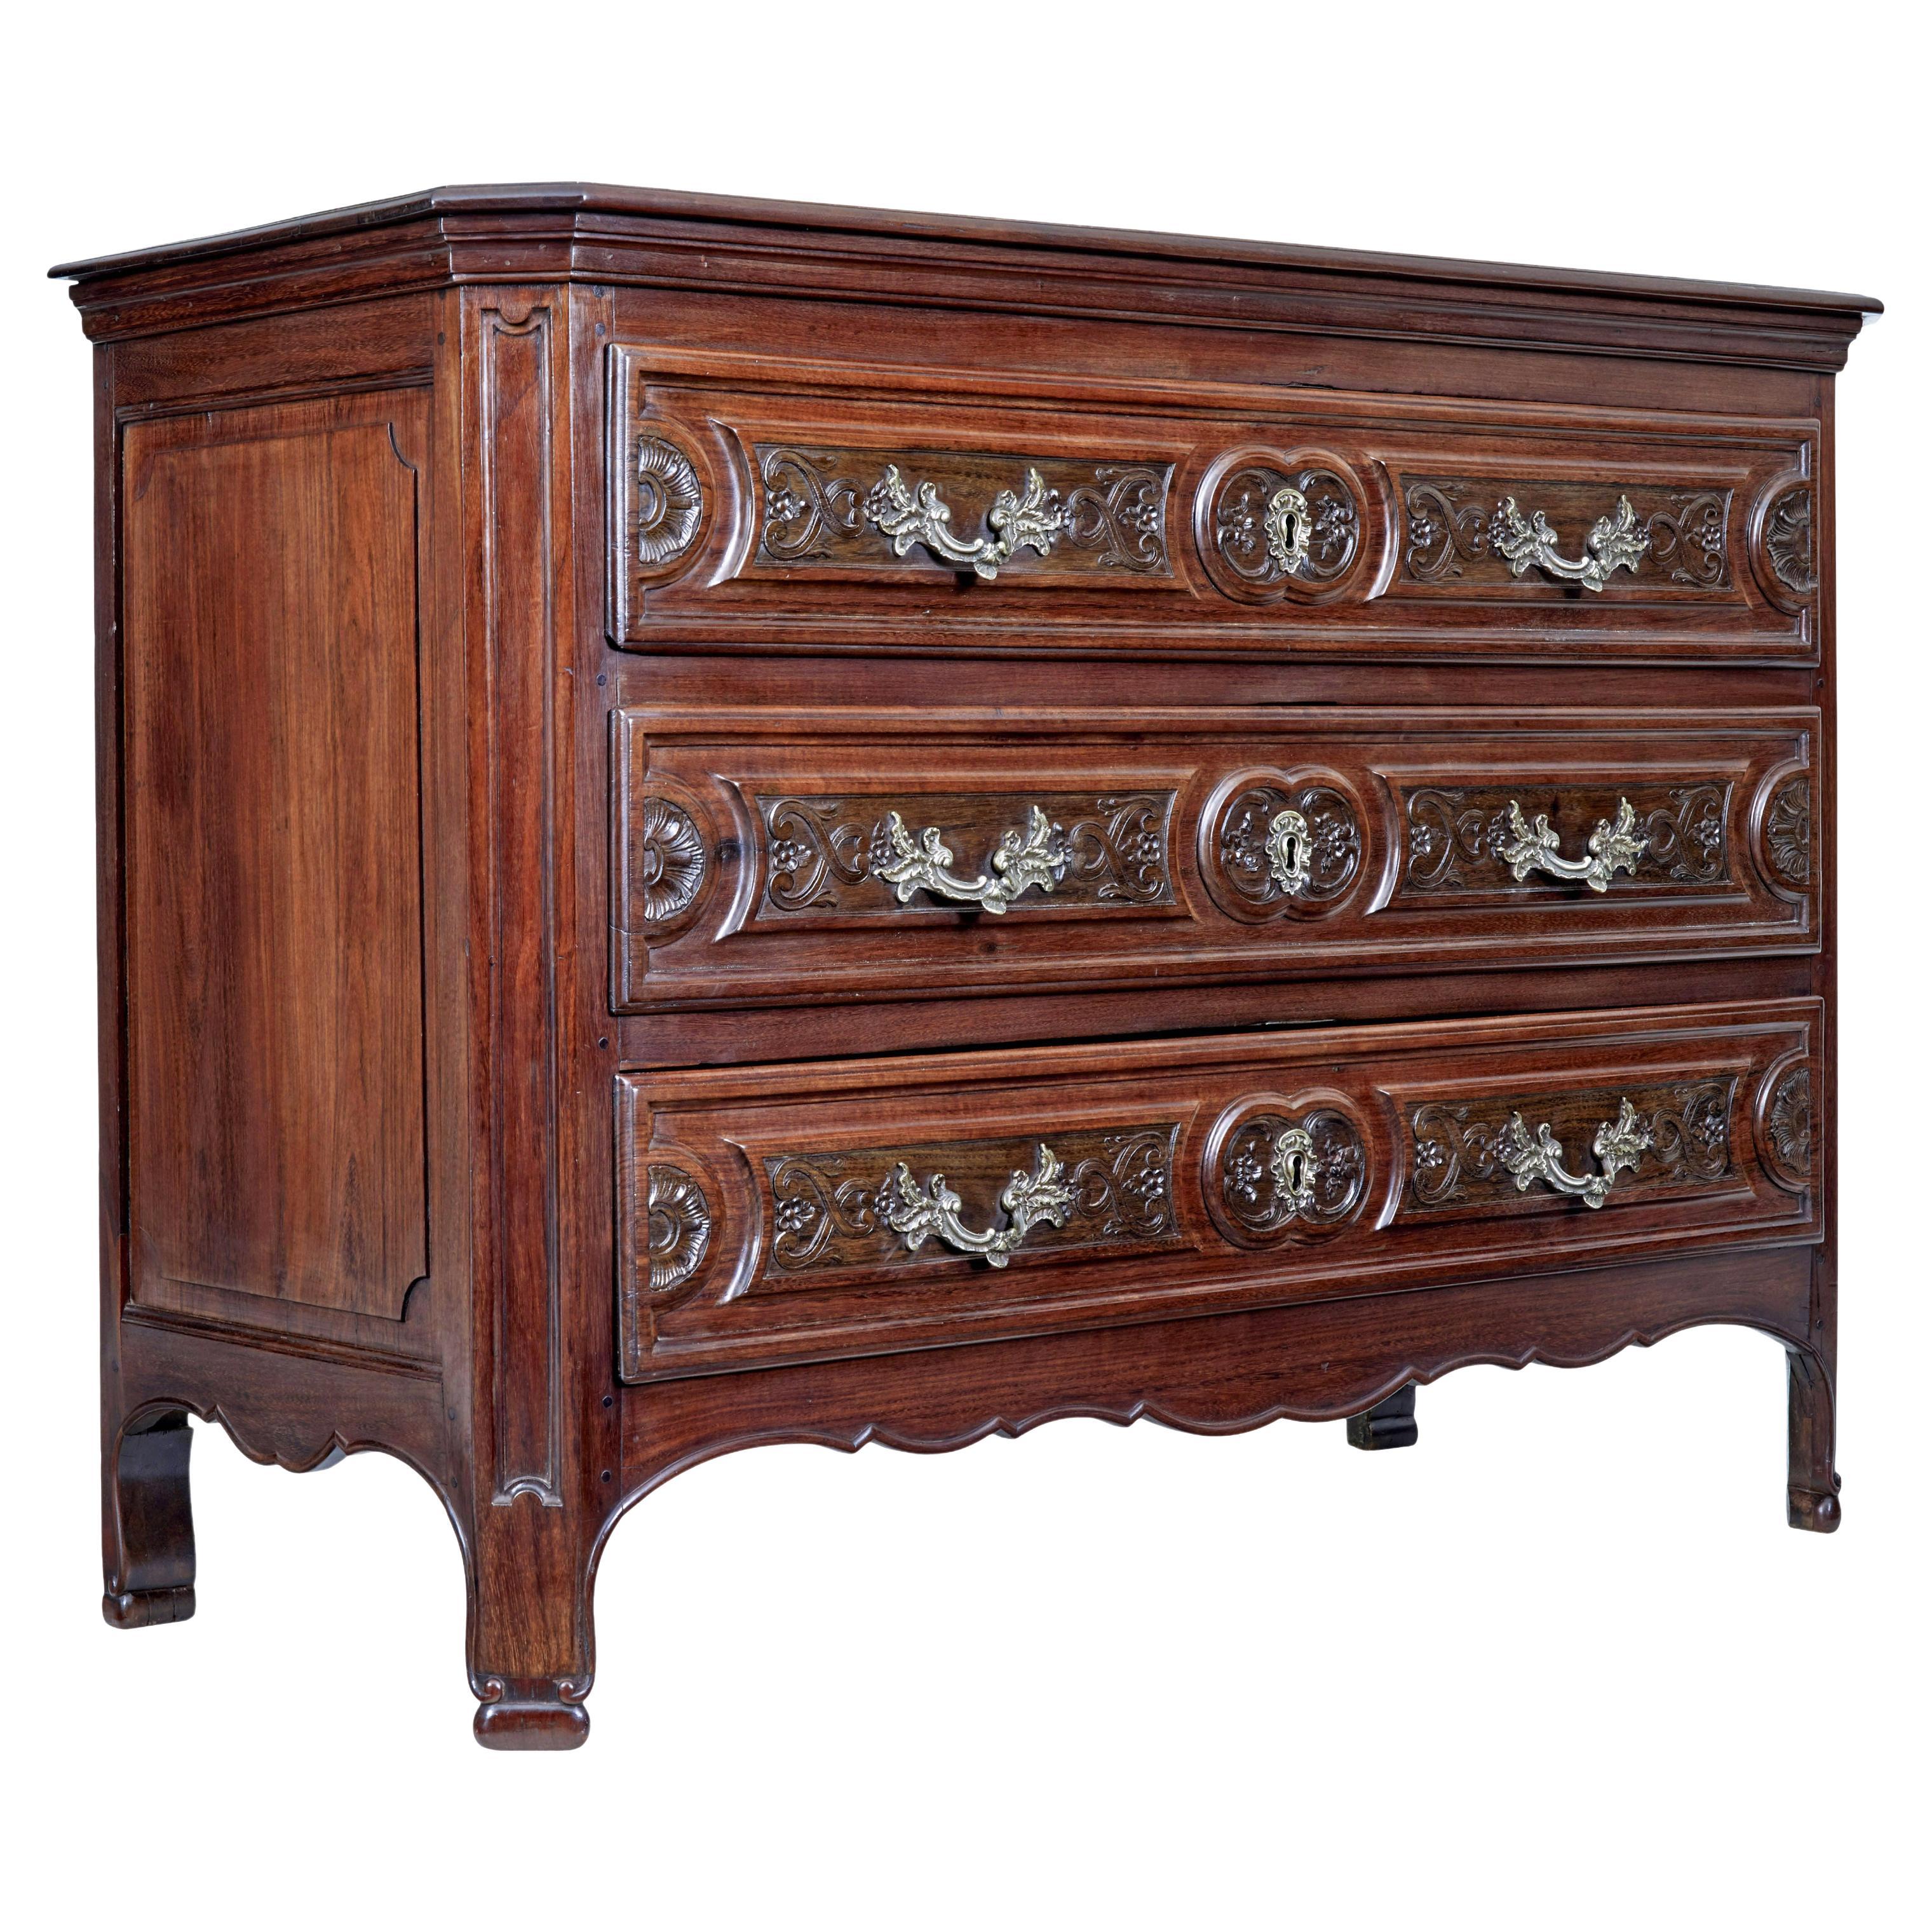 Carved walnut 19th century French provincial commode